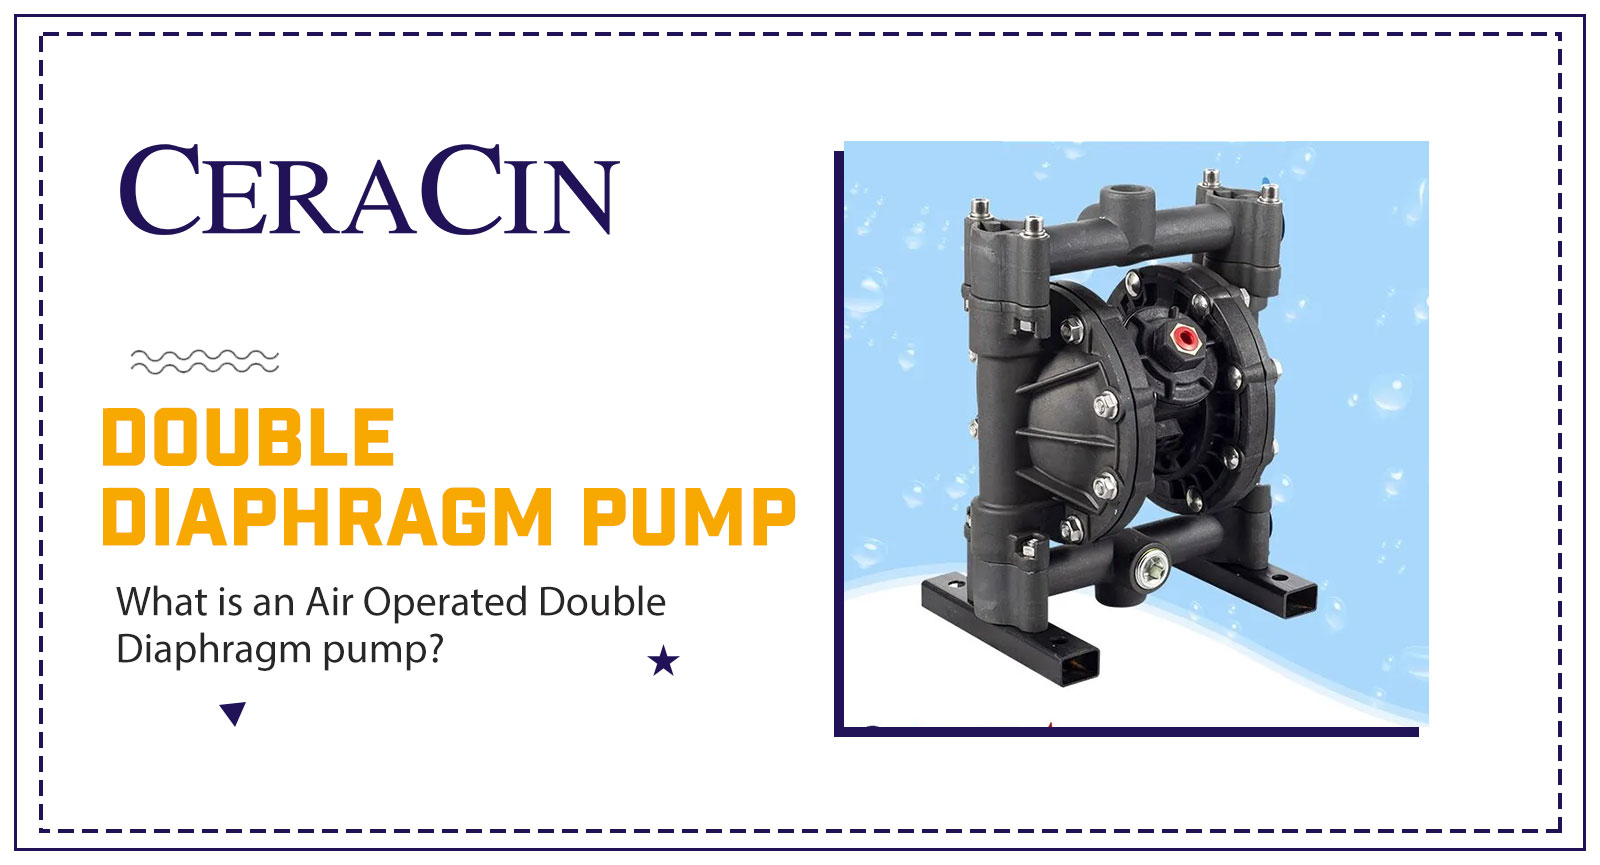  What is an Air Operated Double Diaphragm pump?